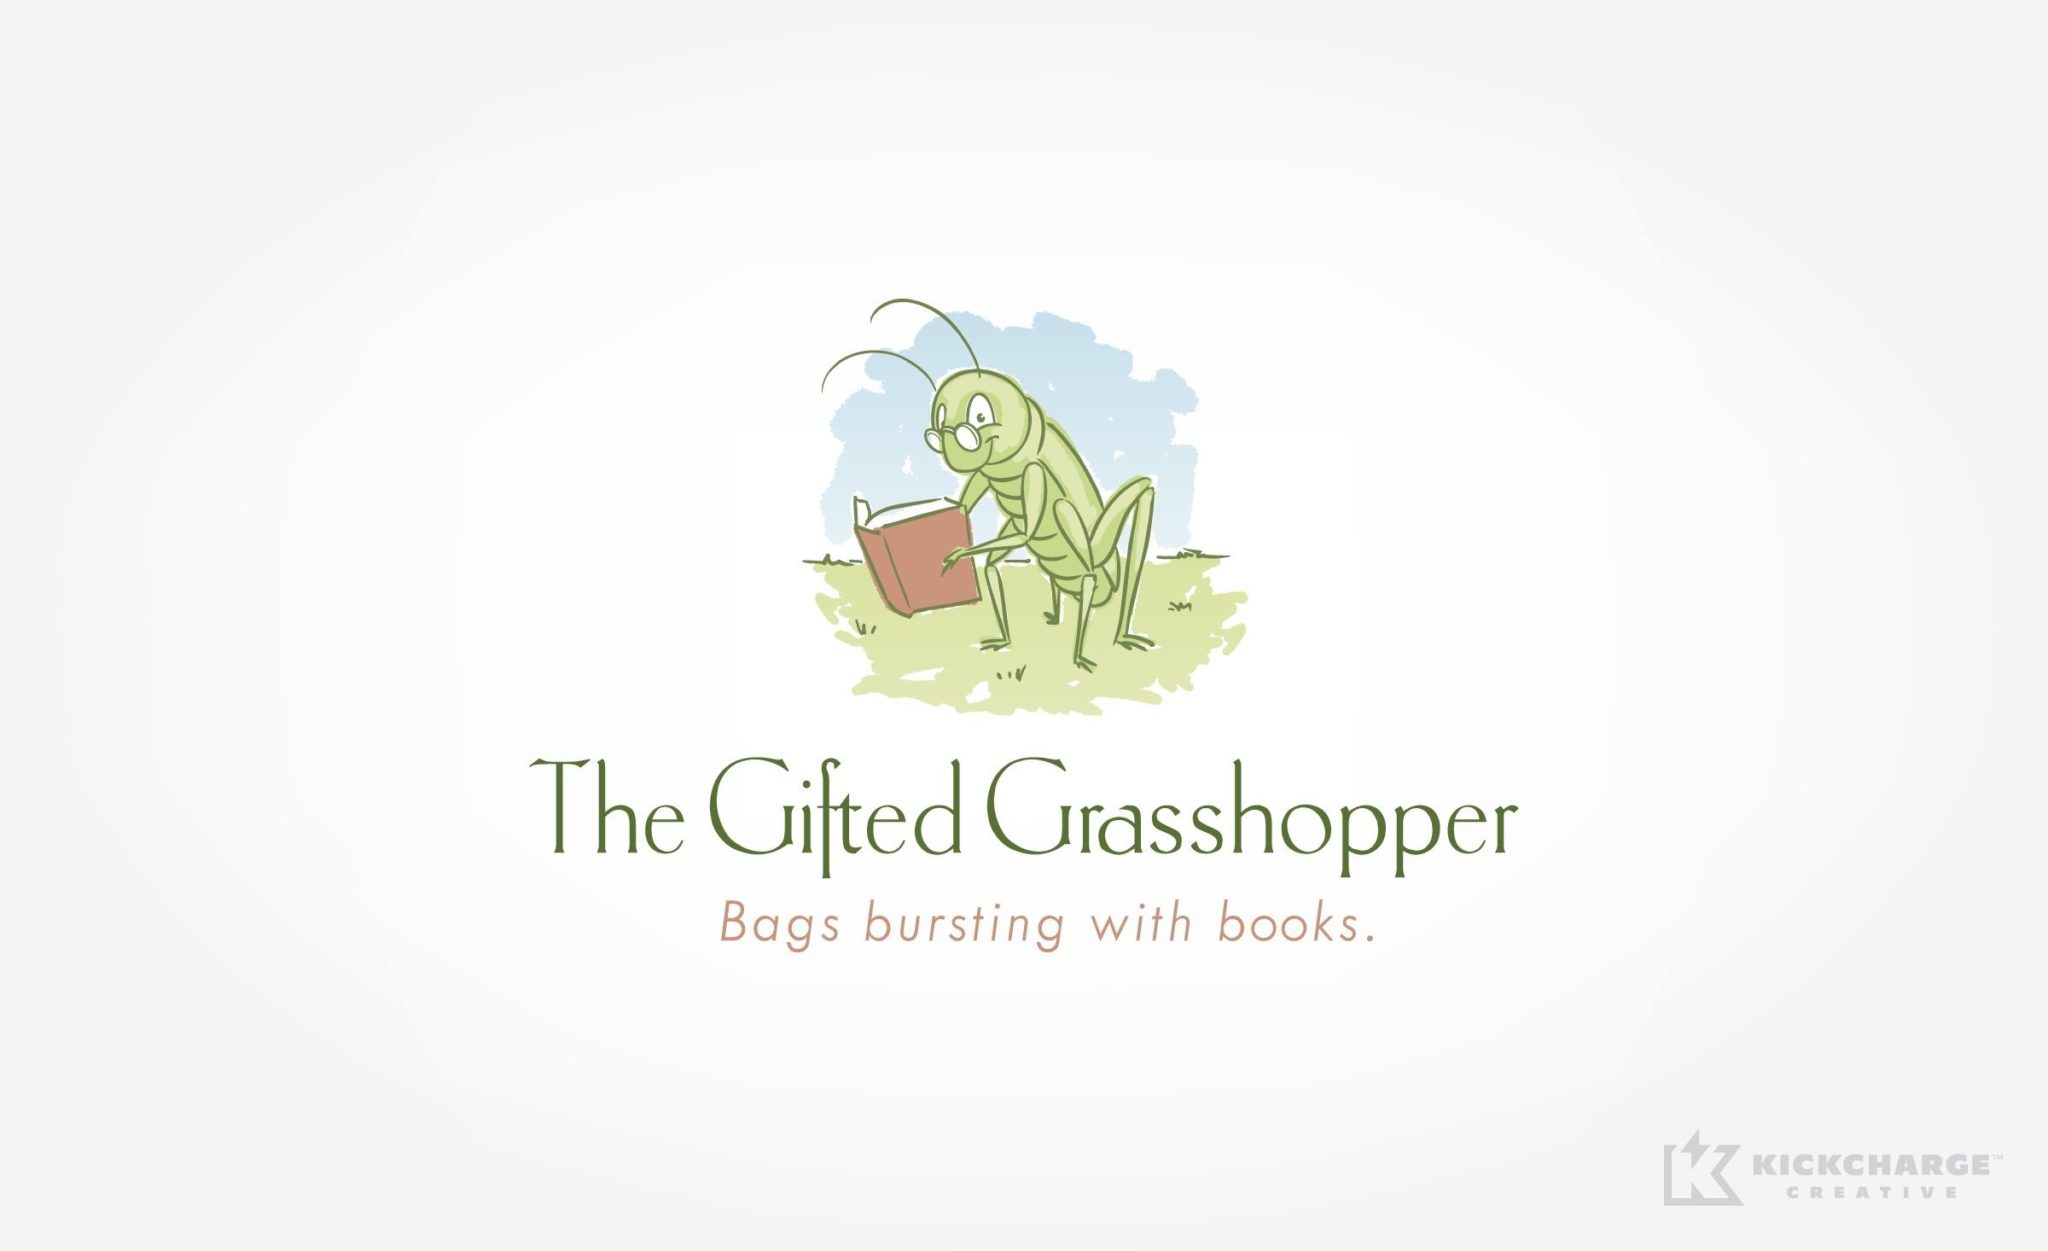 The Gifted Grasshopper